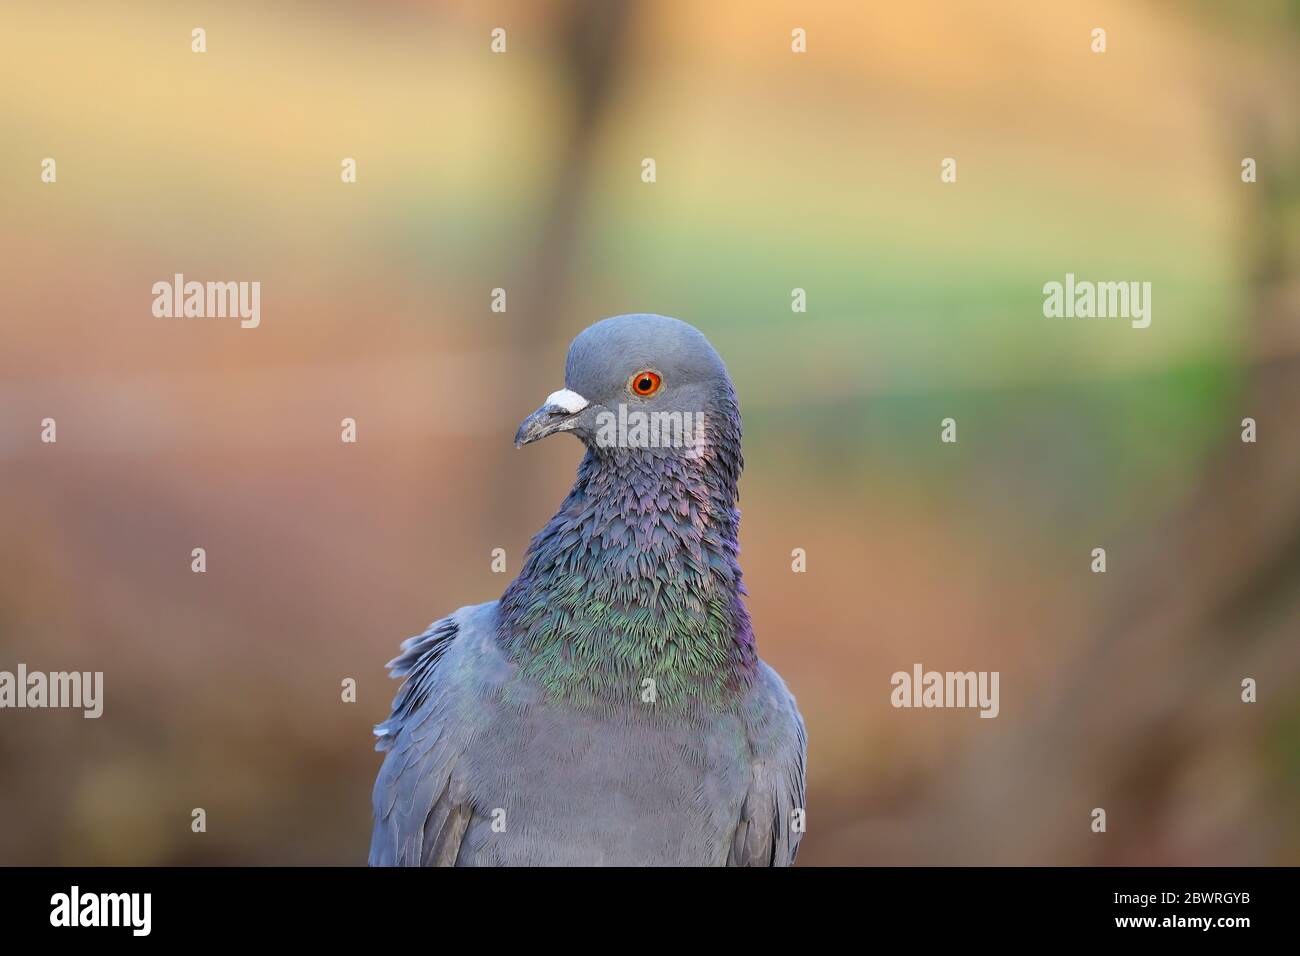 front view portrait of rock pigeon bird photography Stock Photo